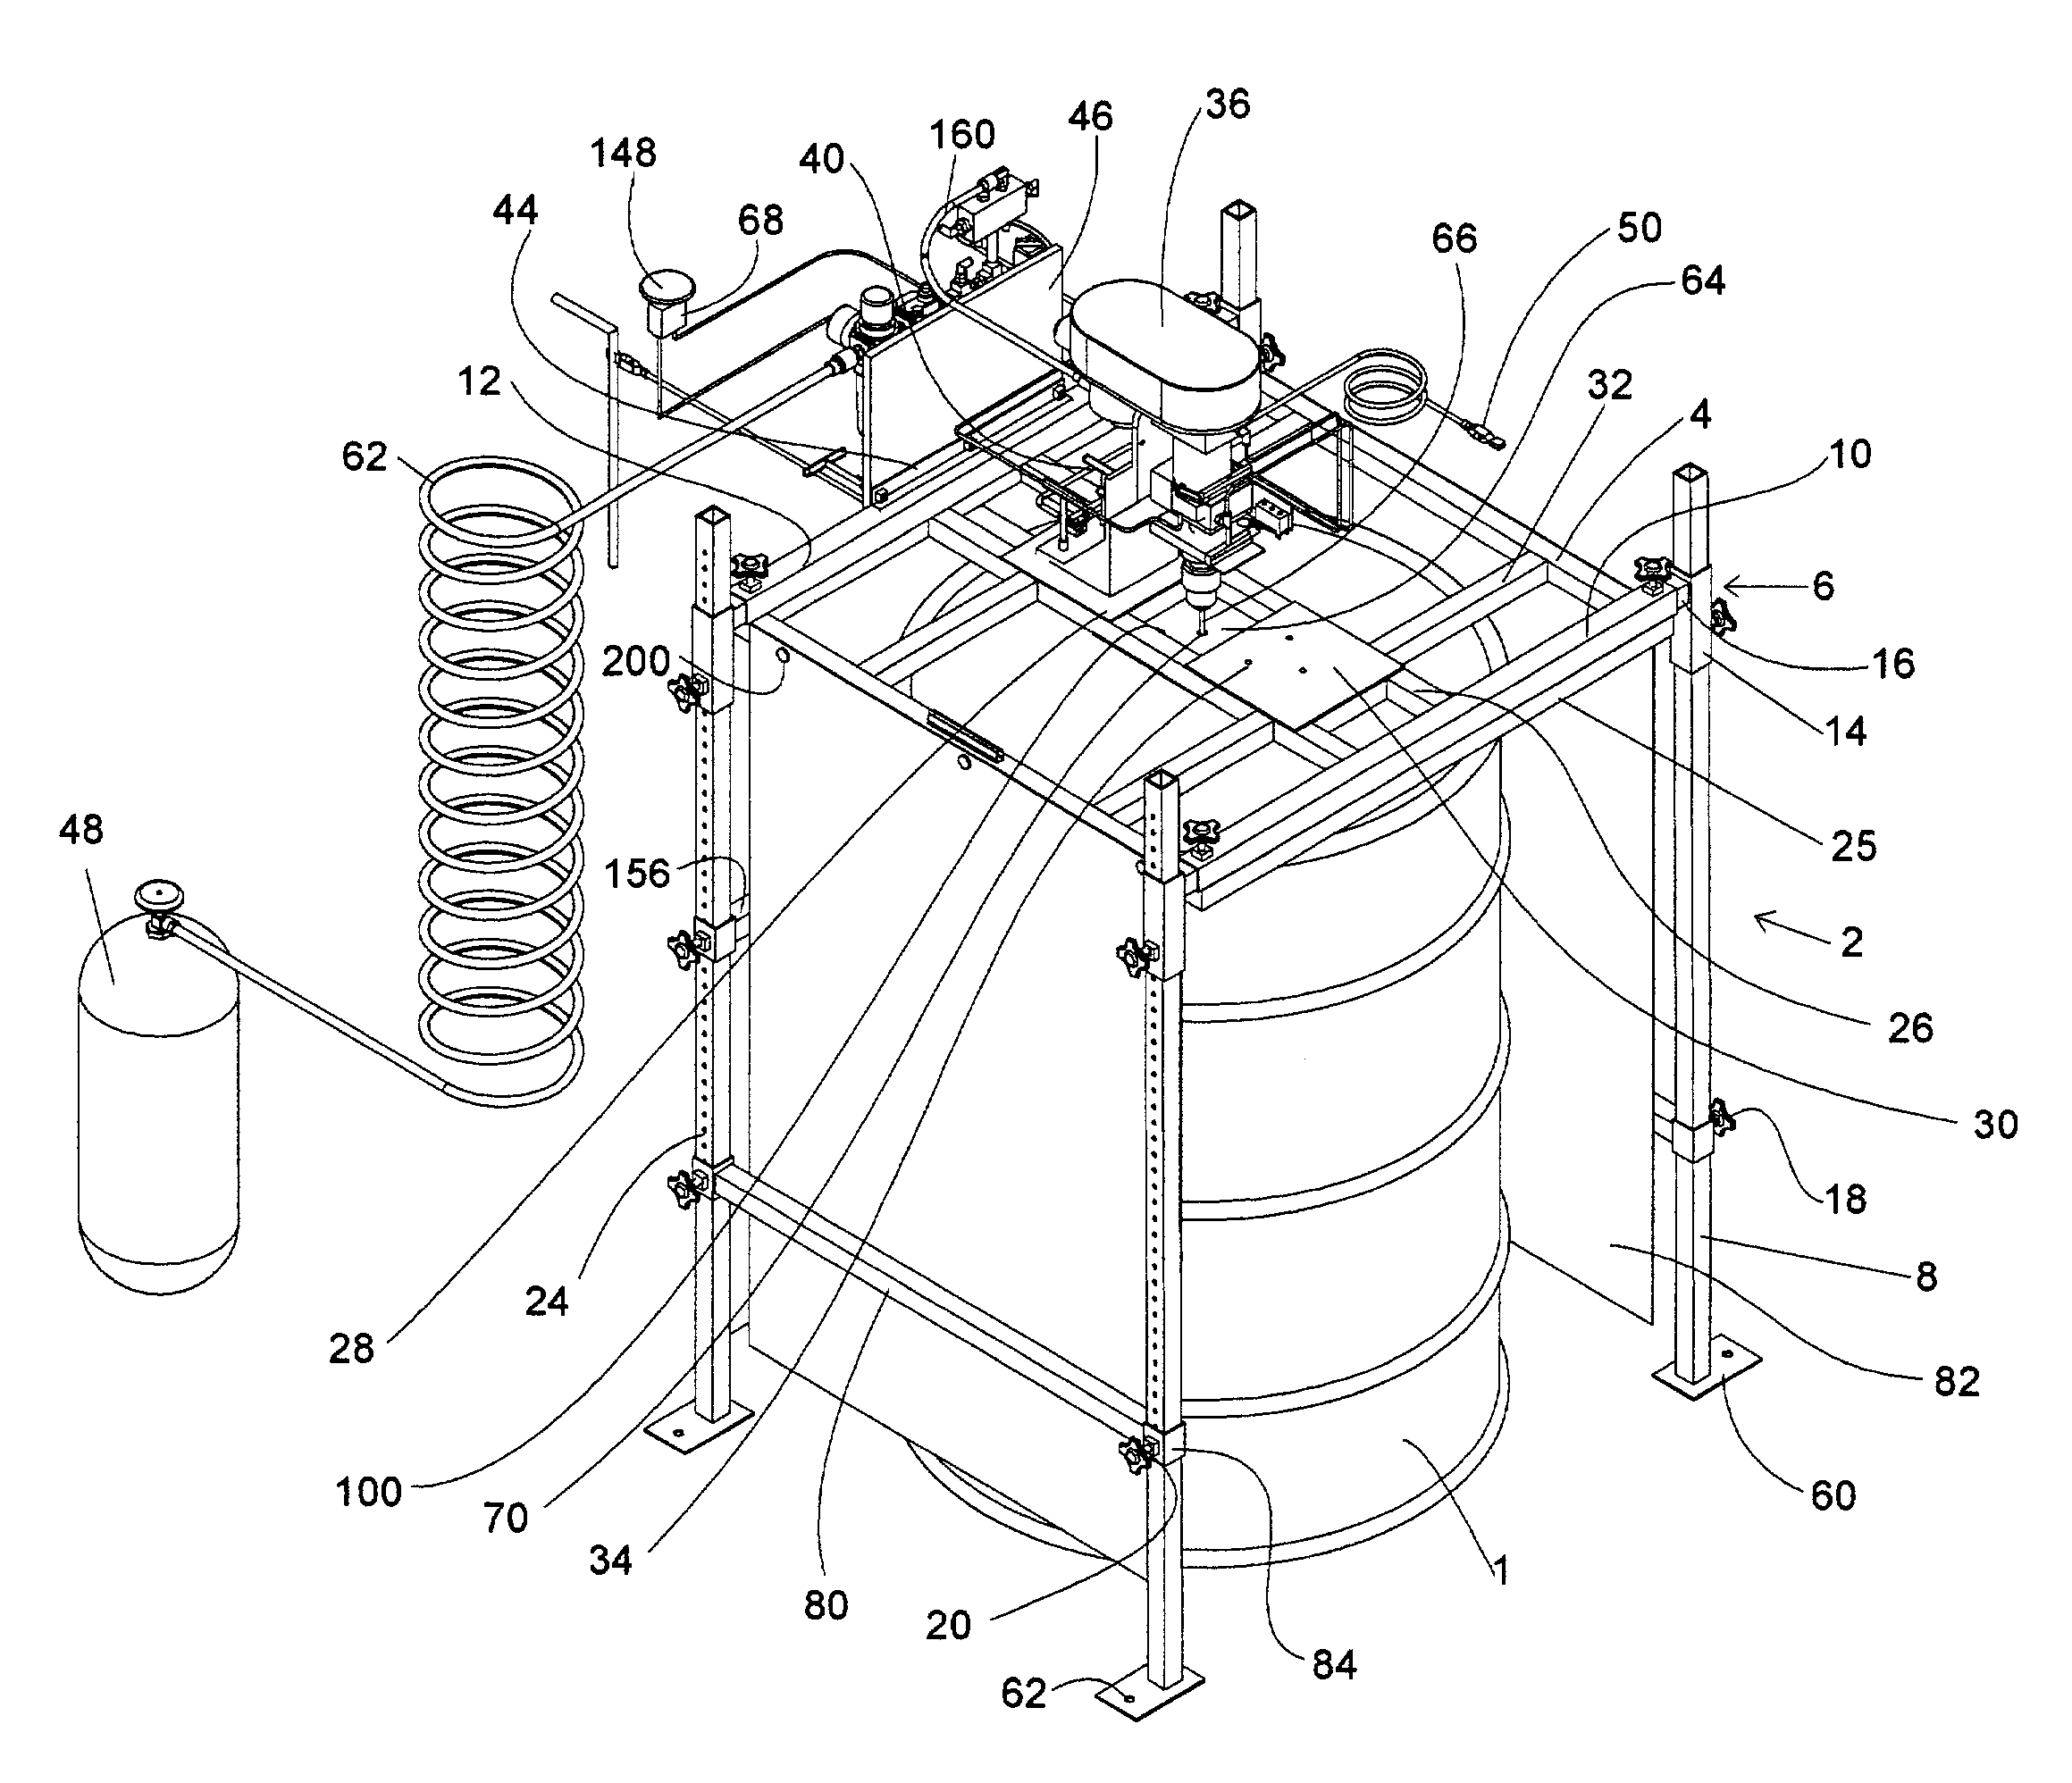 Container drilling apparatus for non-intrusive perforation of pressurized containers